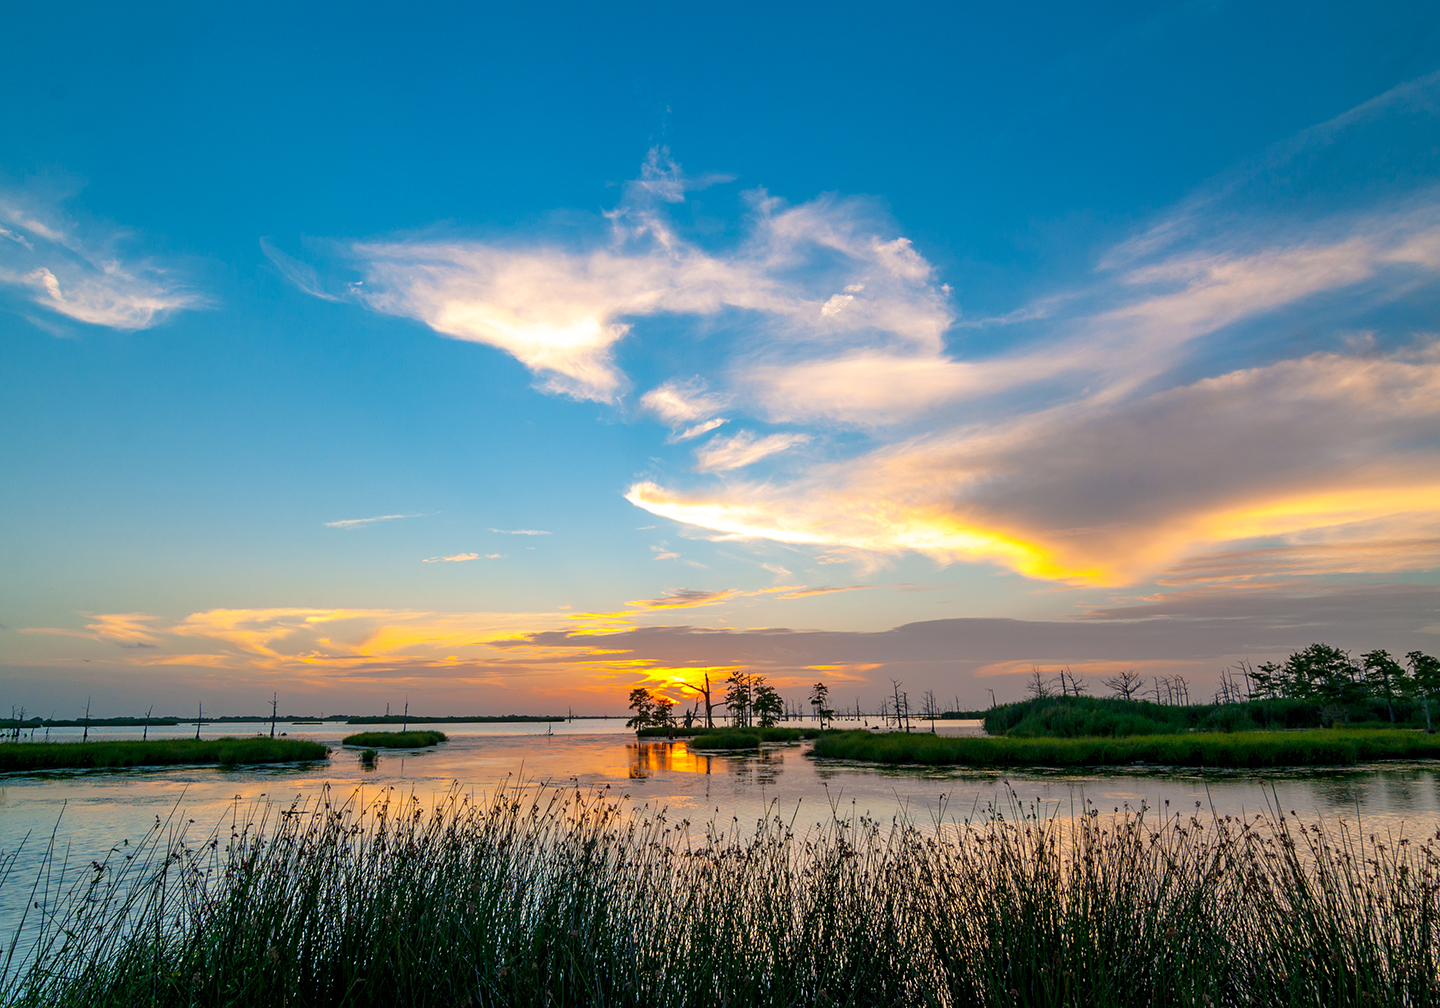 A view of the Louisiana wetlands at sunset, with grass in the foreground, water in the center, and sky in the distance.